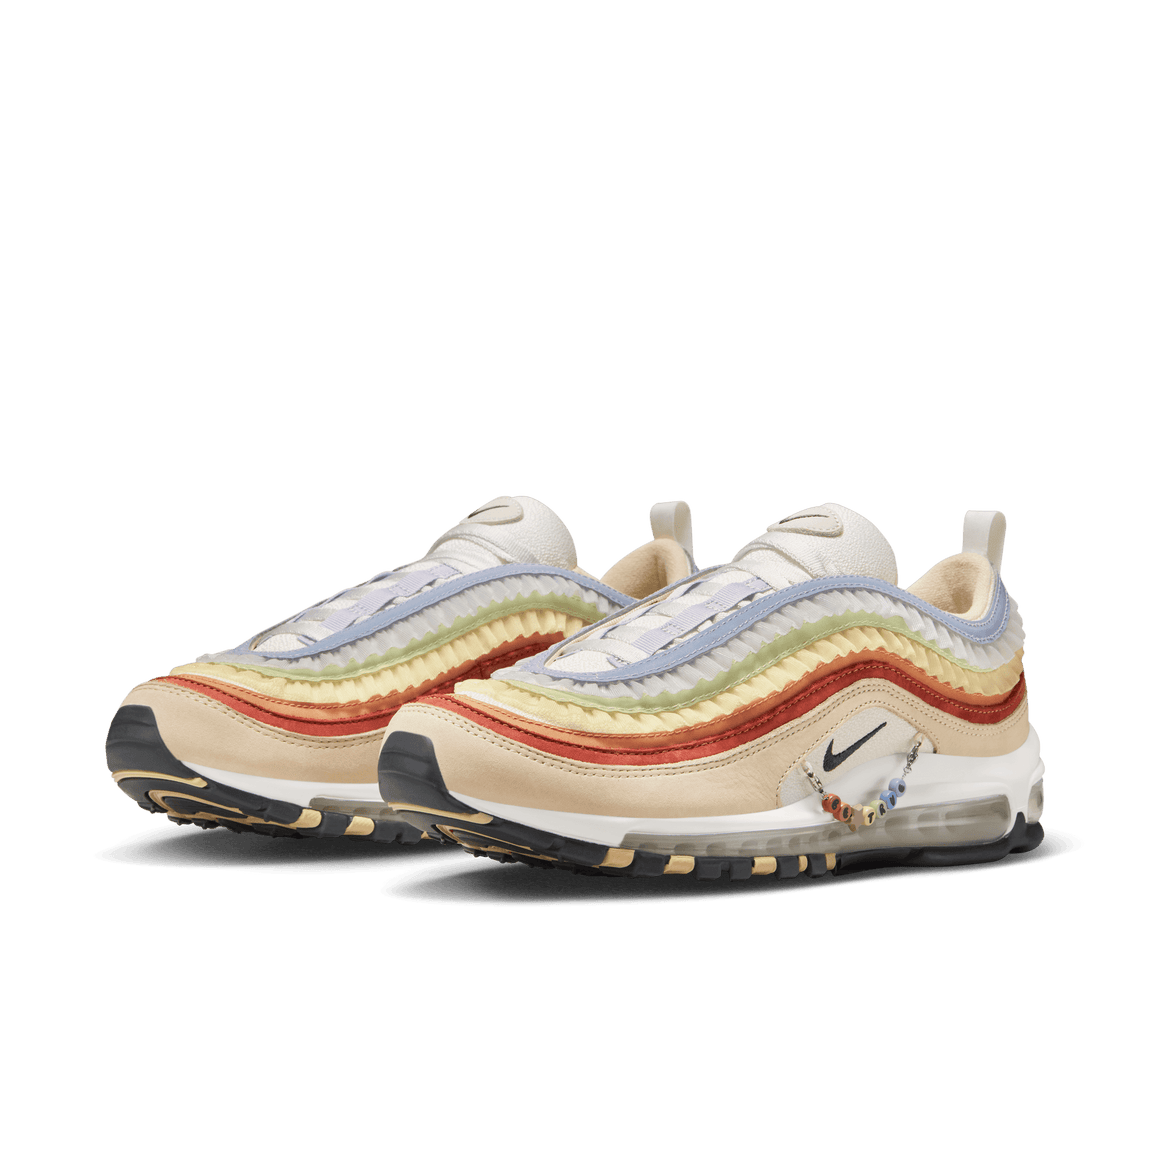 Nike Air Max 97 Be True (Pink Oxford/Anthracite-Adobe) 6/1 - Nike Air Max 97 Be True (Pink Oxford/Anthracite-Adobe) 6/1 - 